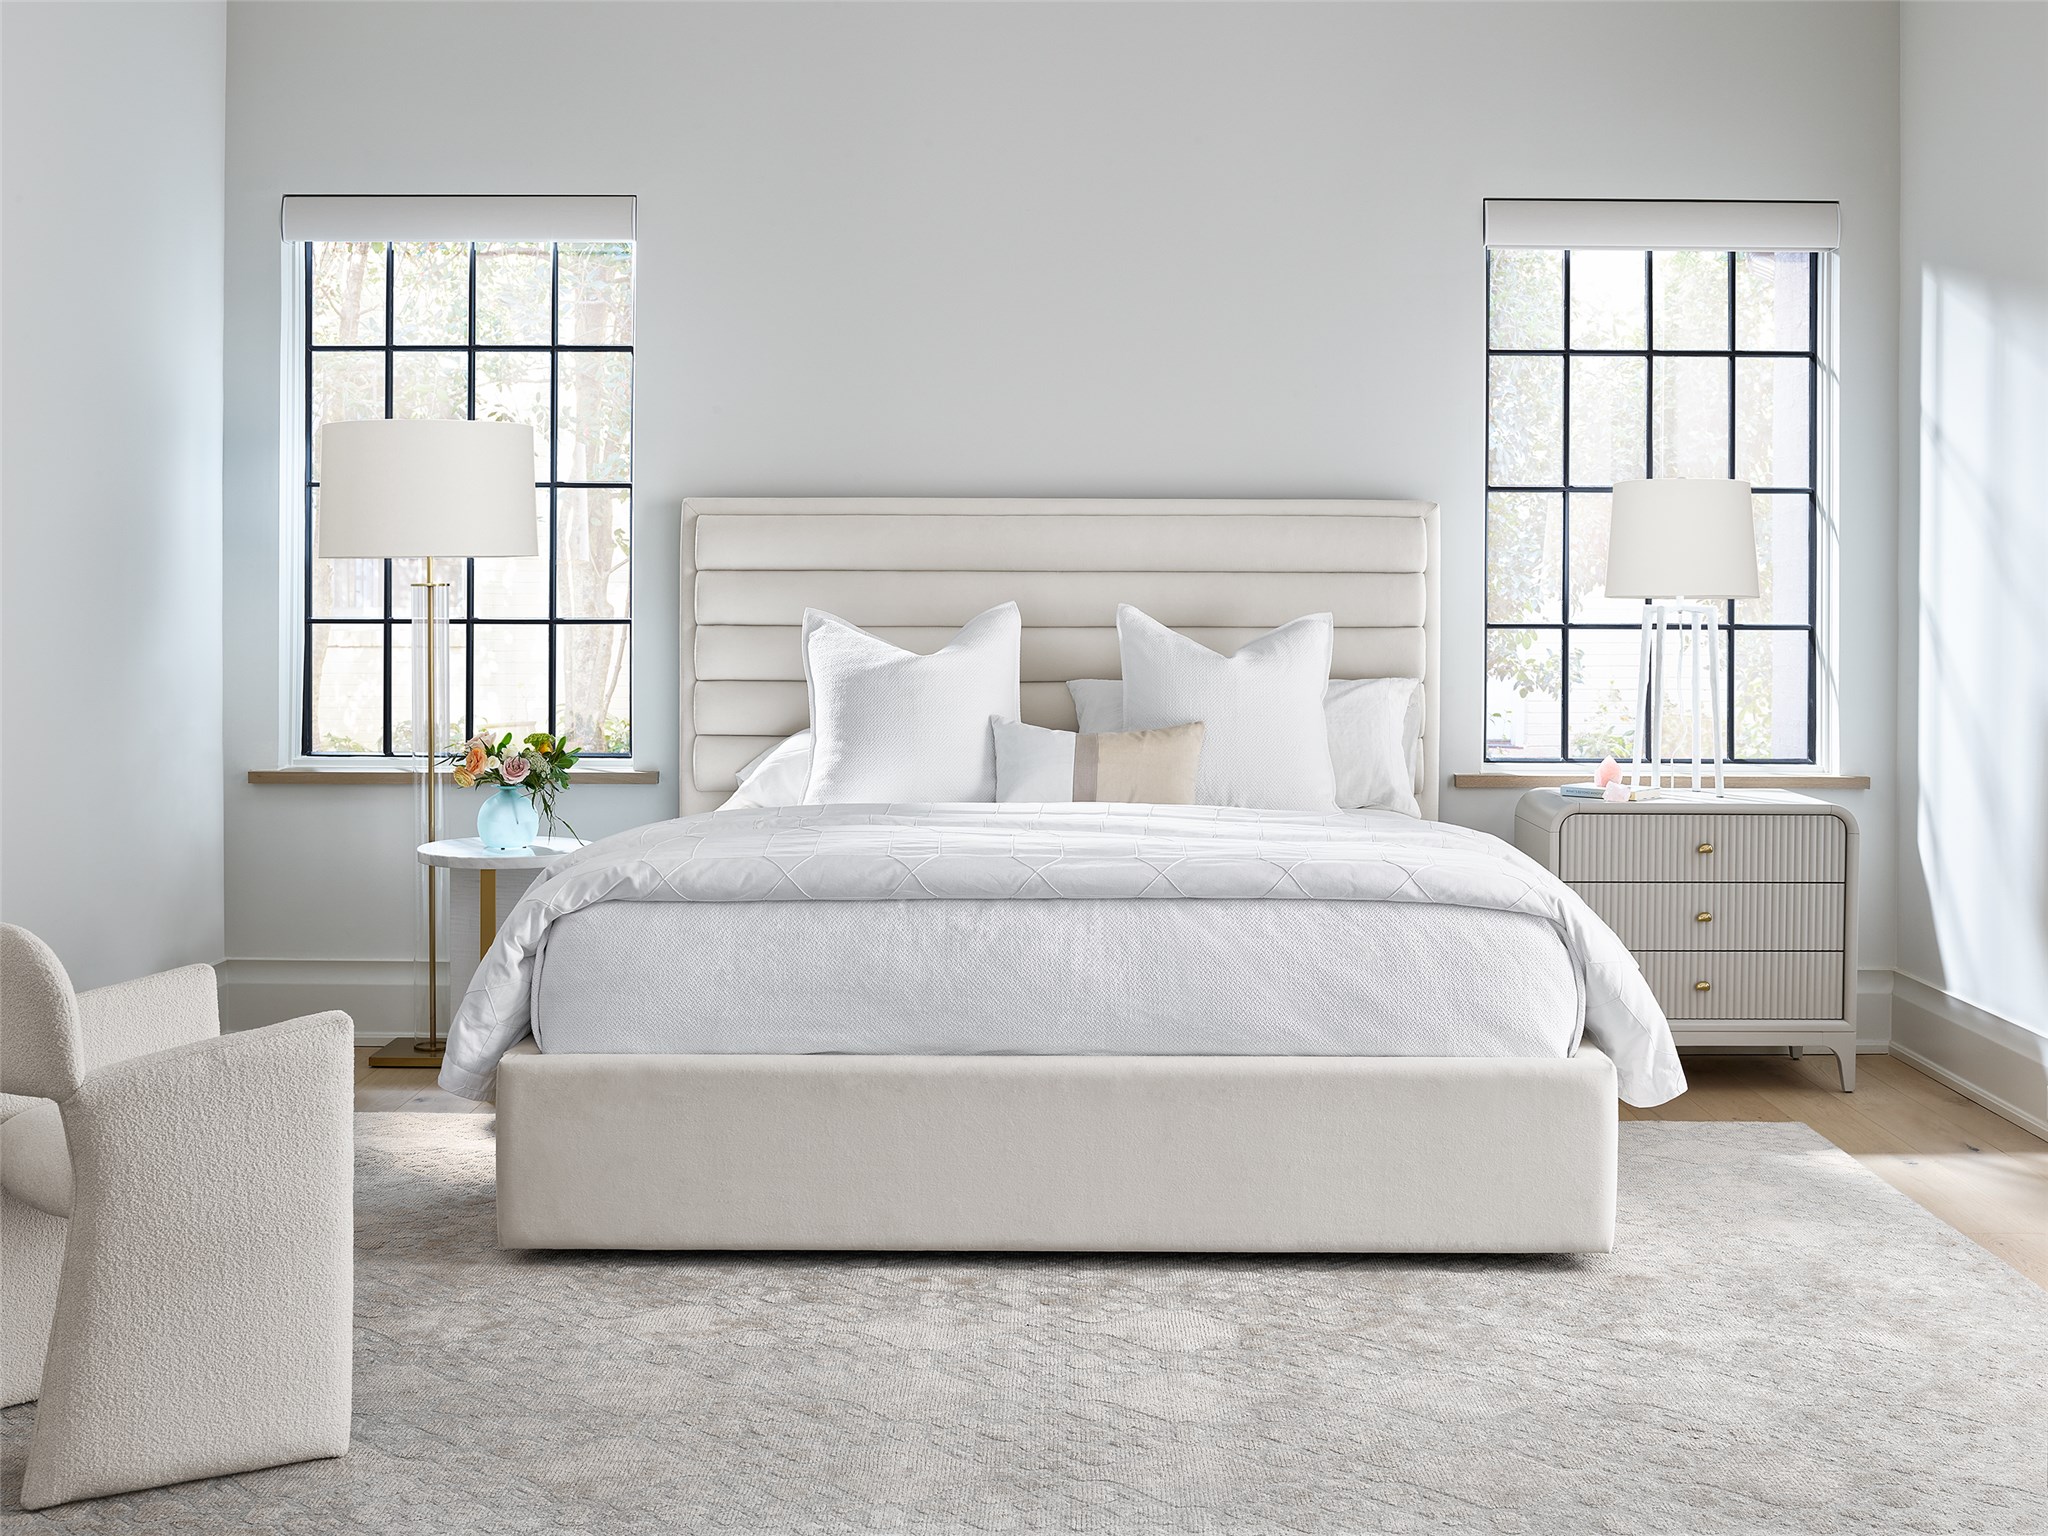 Tranquility - Miranda Kerr Home Tranquility Upholstered Bed King ...